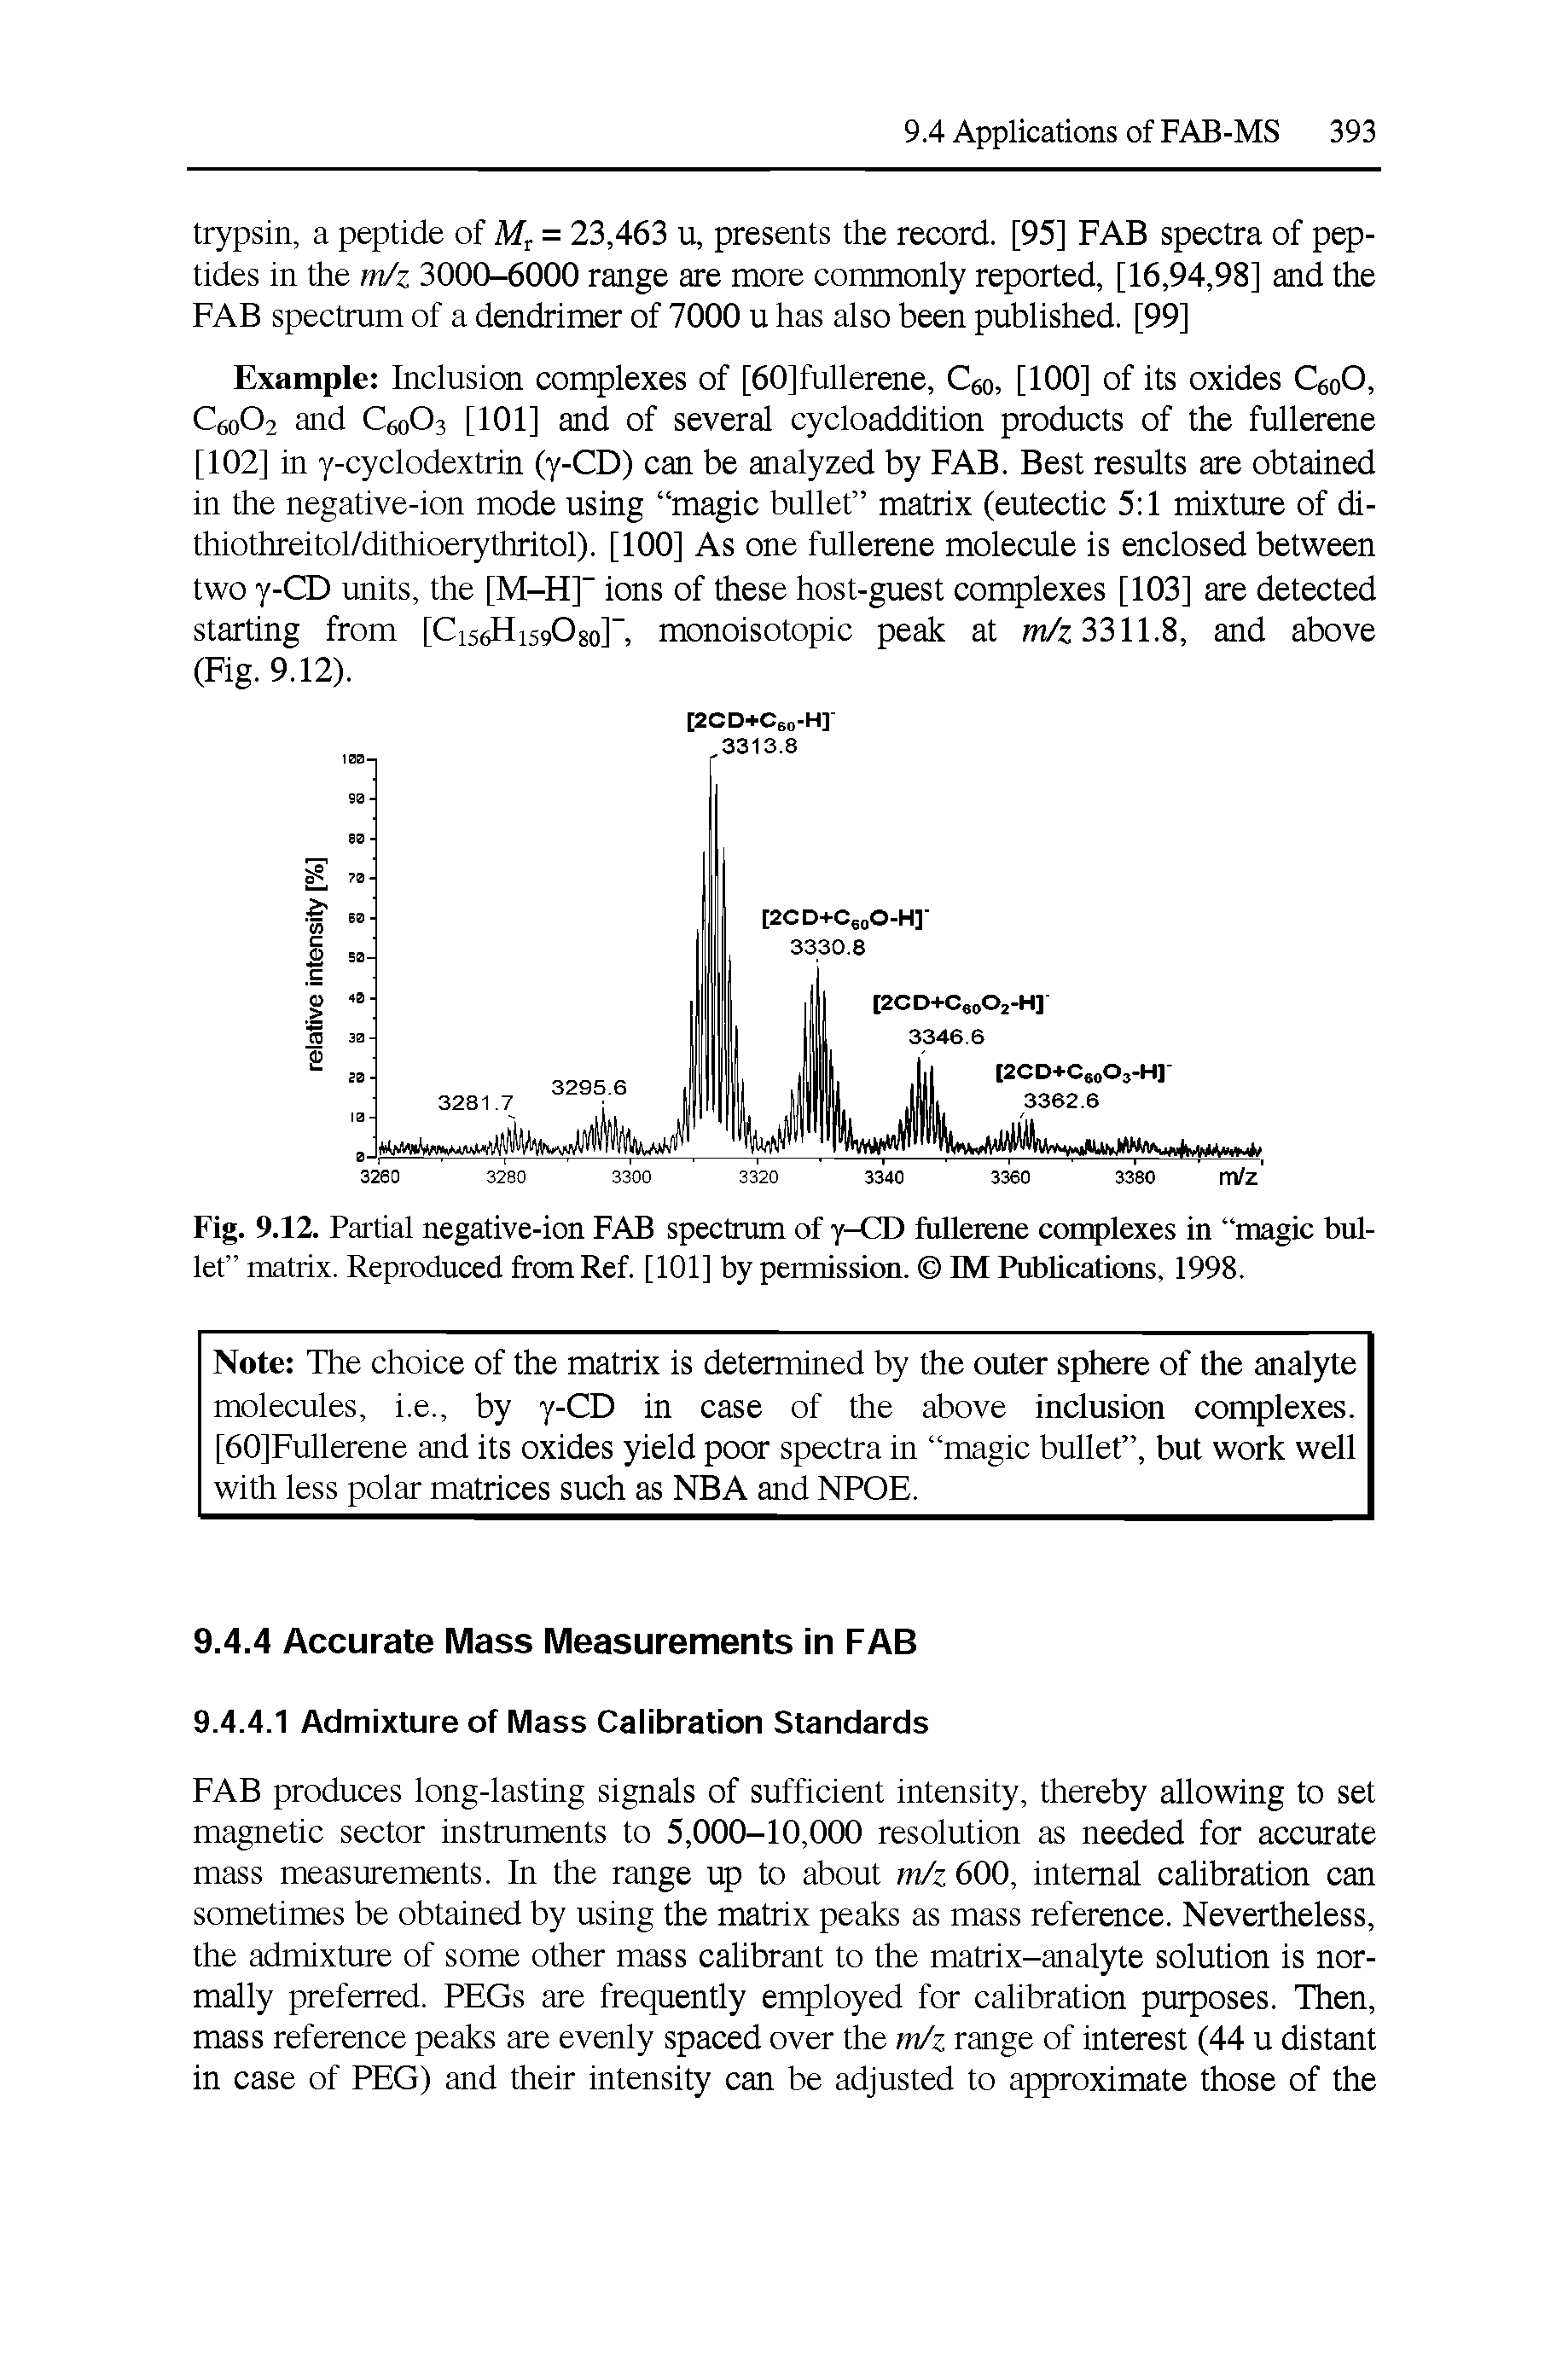 Fig. 9.12. Partial negative-ion FAB spectrum of y-CD fullerene complexes in magic bullet matrix. Reproduced from Ref. [101] by permission. IM Publications, 1998.